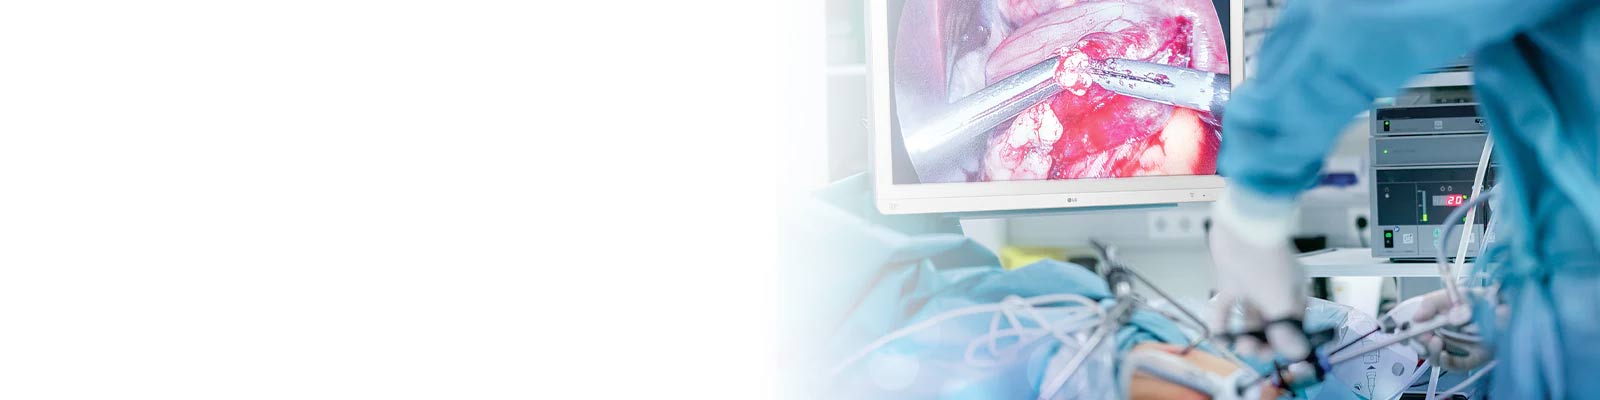 medical-solutions-thin-hero-surgical-monitors